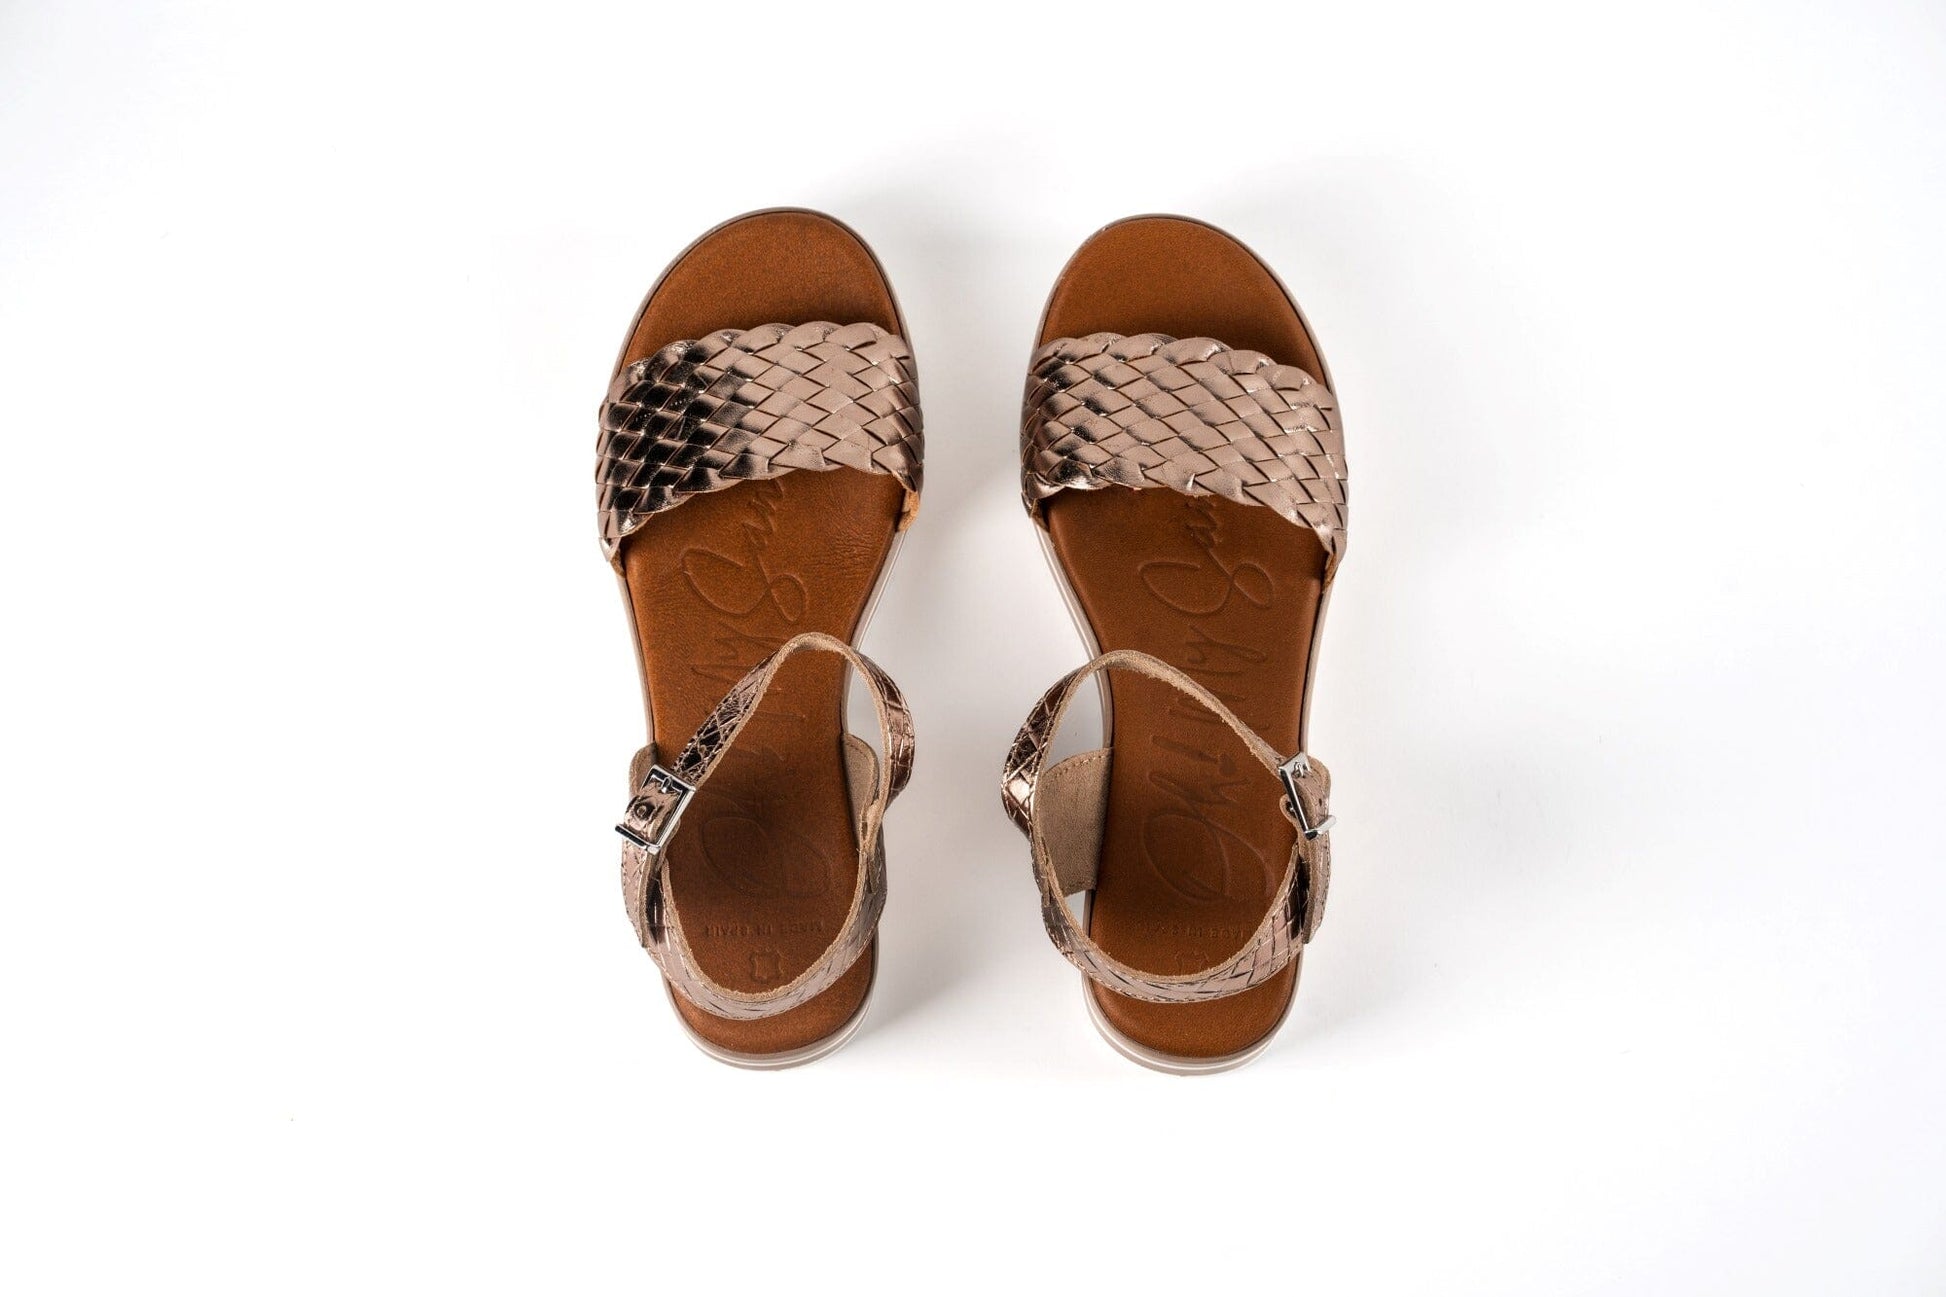 5276TB Spanish leather woven sandals/wedge in Gold sandals Sam Star Shoes 